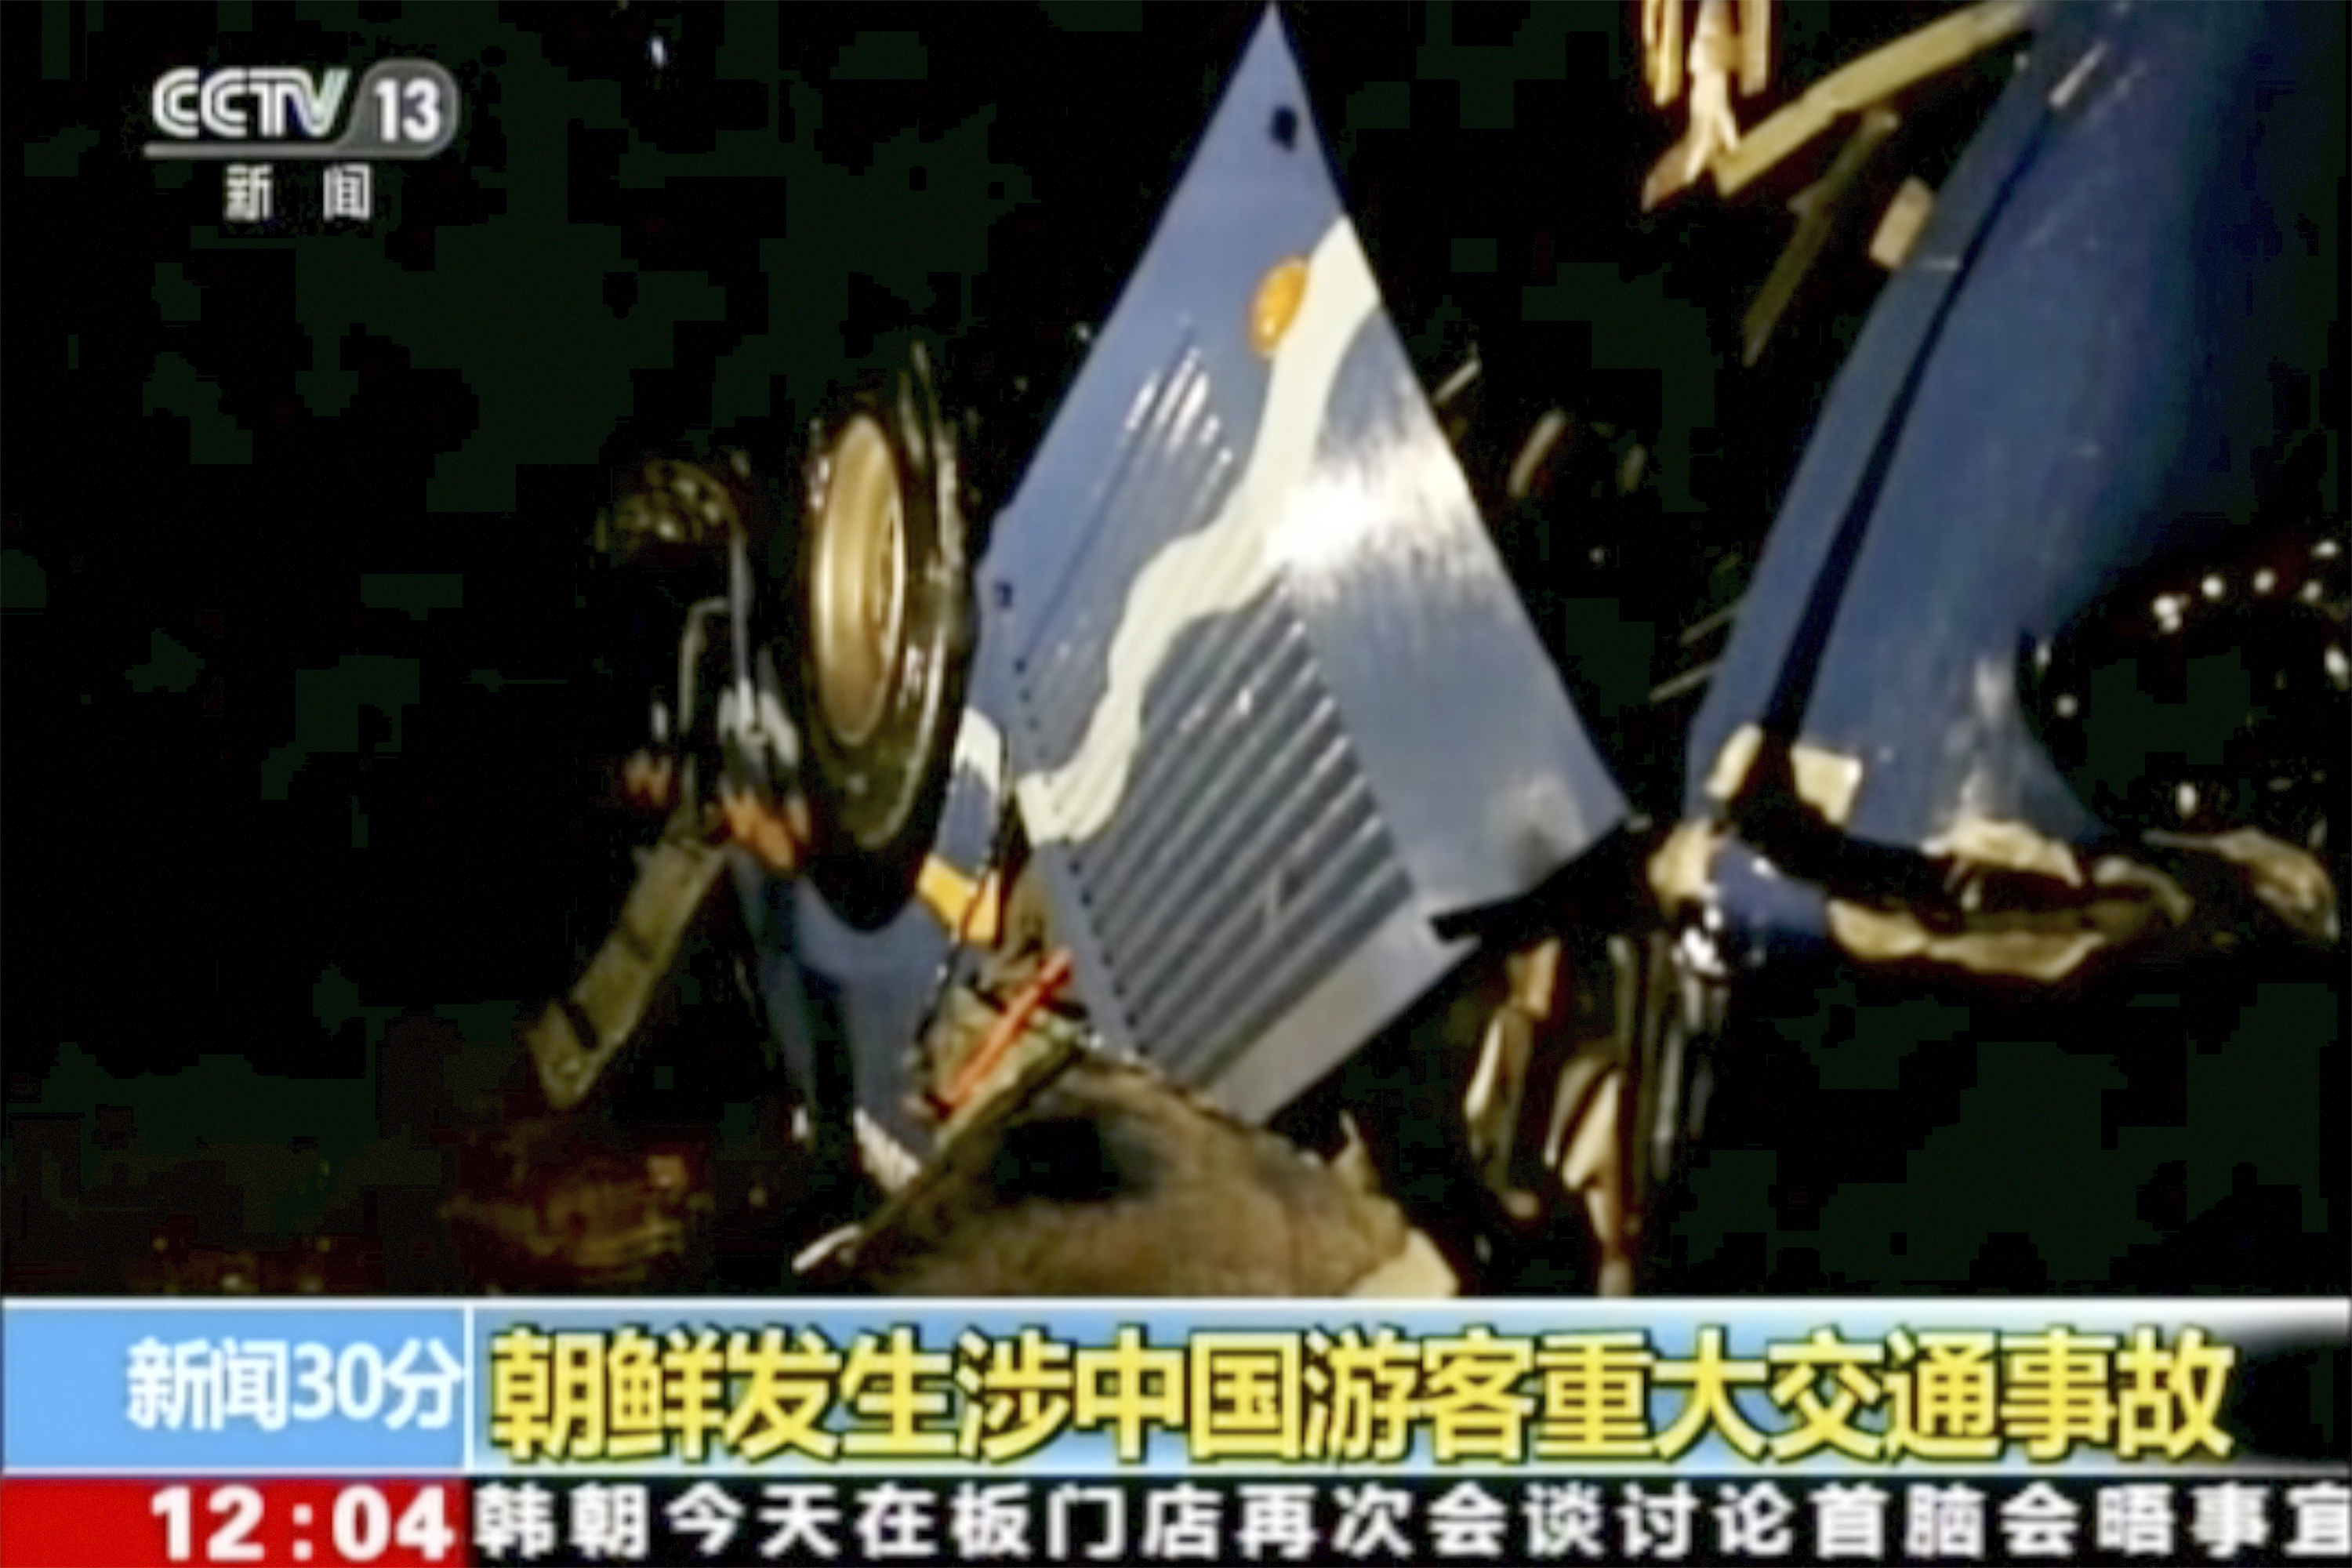 The bus overturned after an accident in North Hwanghae province (CCTV via AP Video)